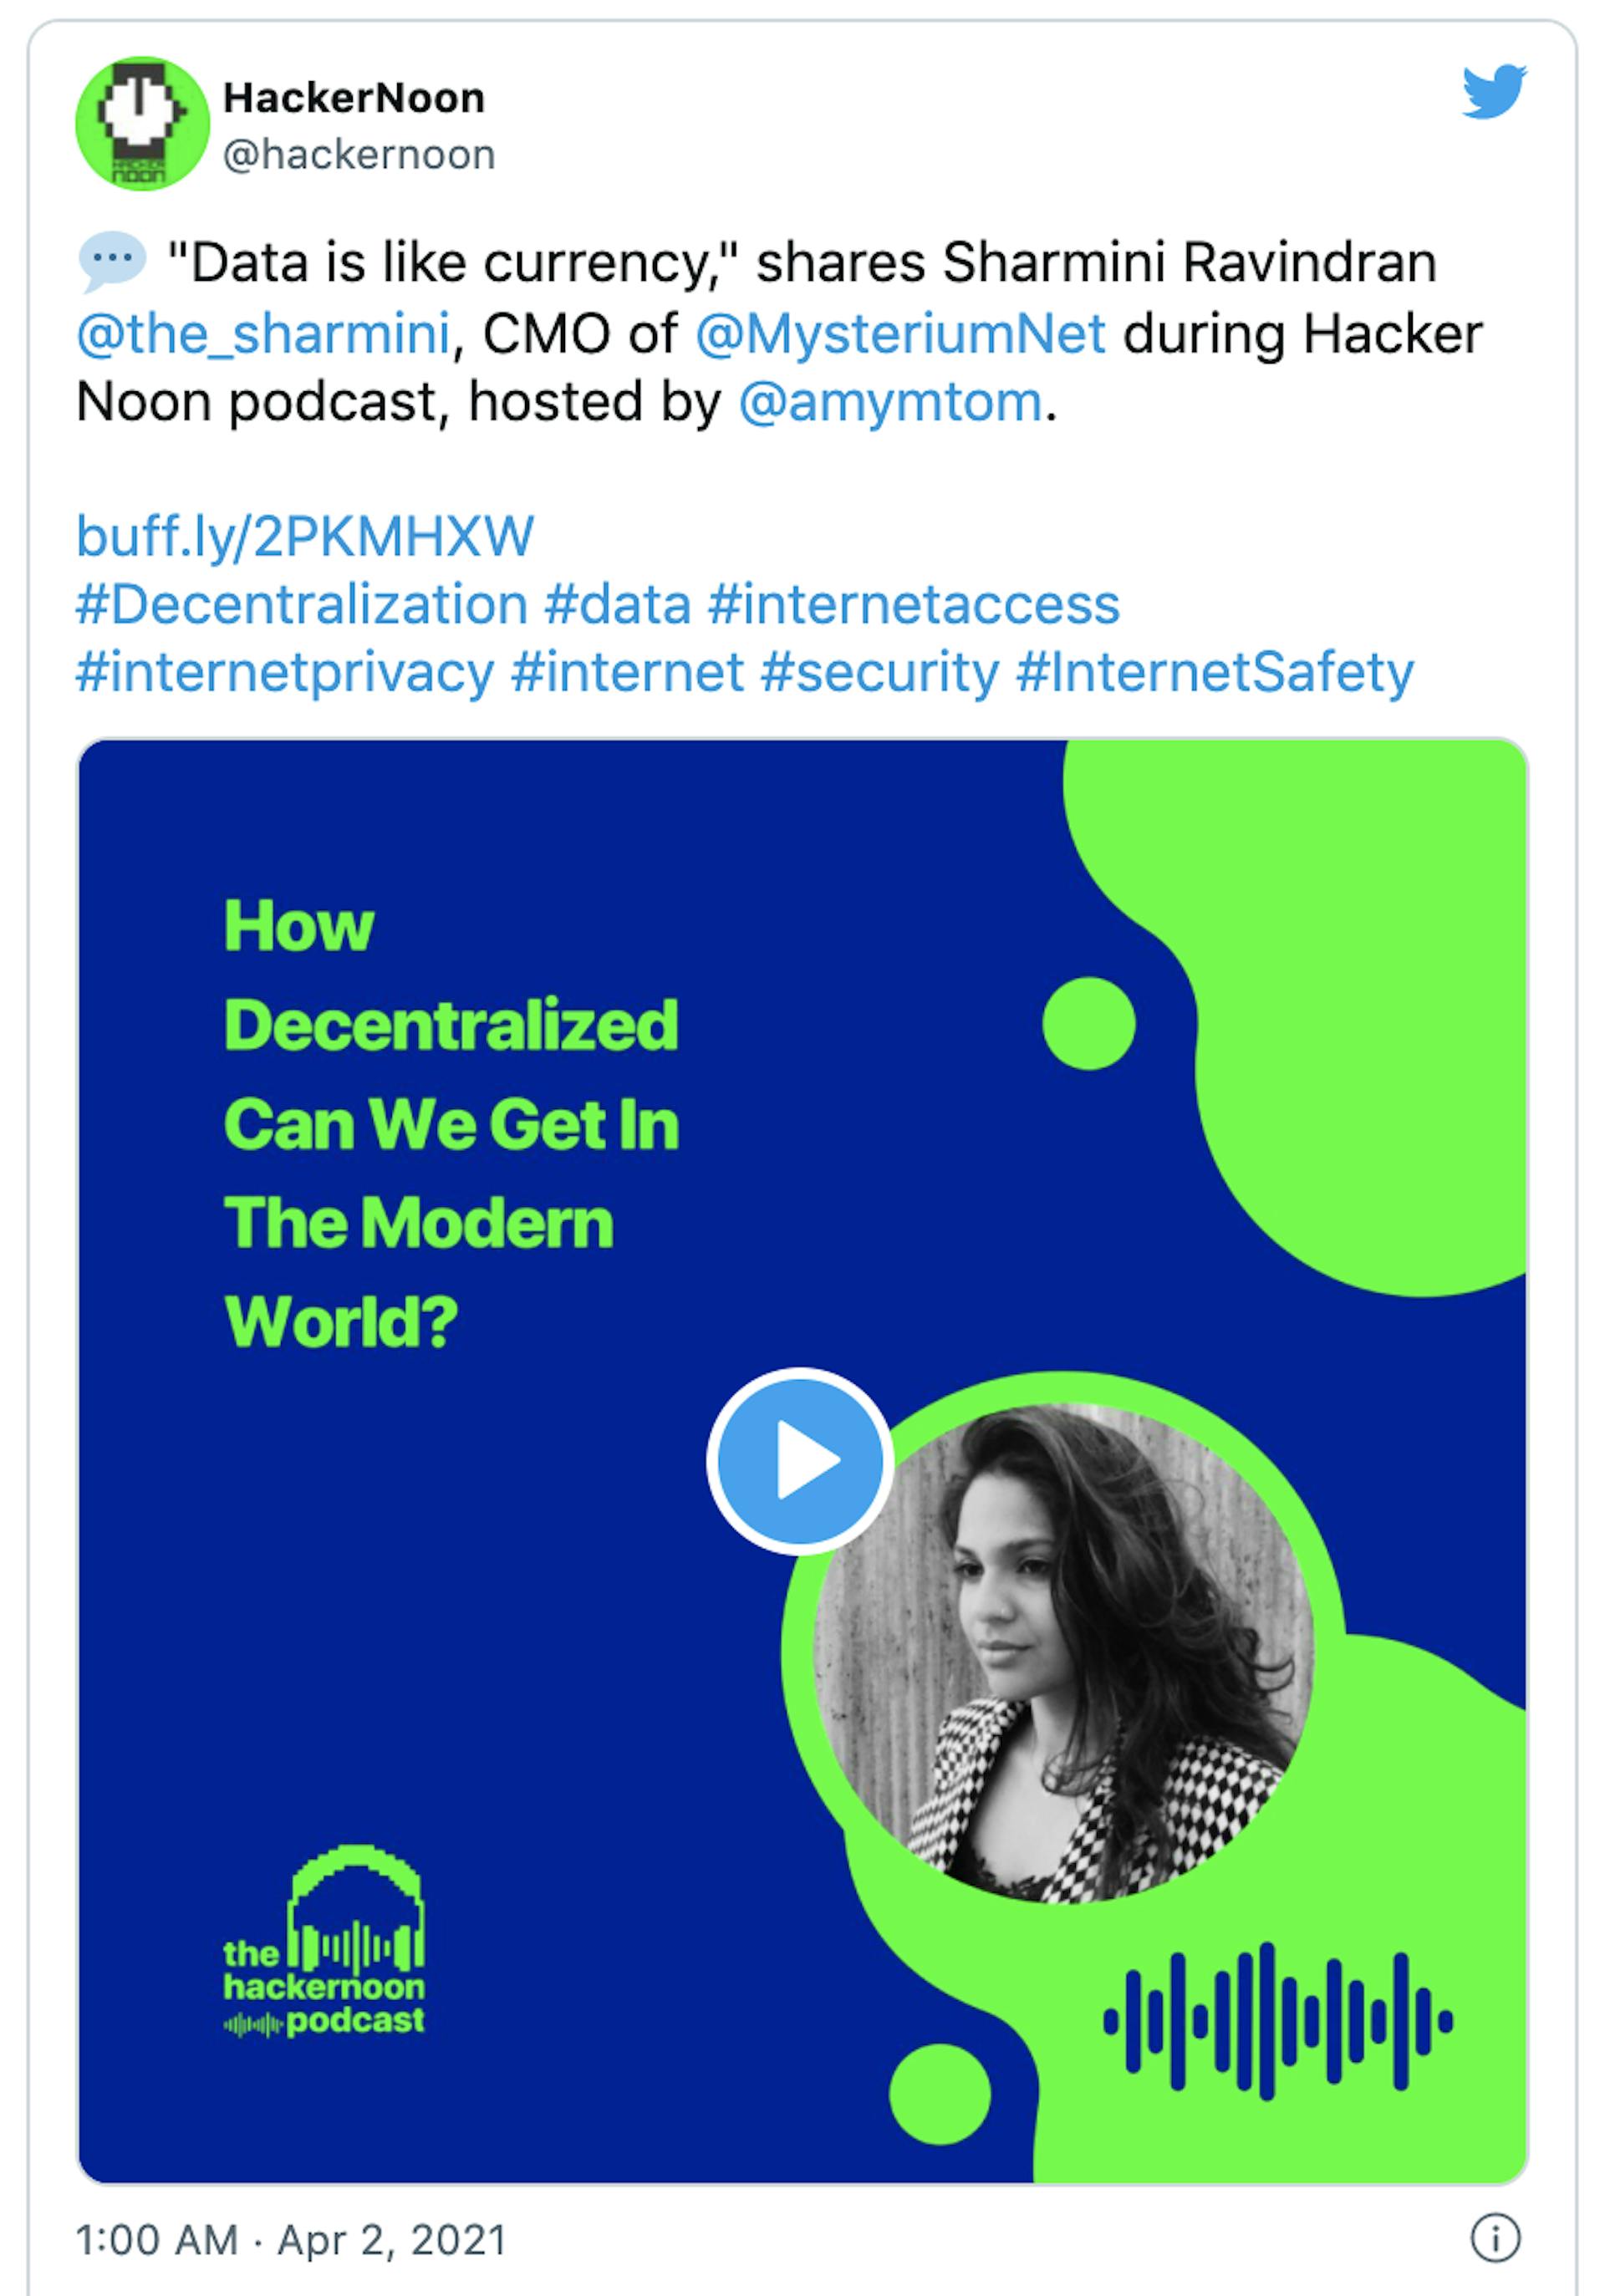 https://podcasts.apple.com/dk/podcast/how-decentralized-can-we-get-in-the-modern-world/id1436233955?i=1000514559216